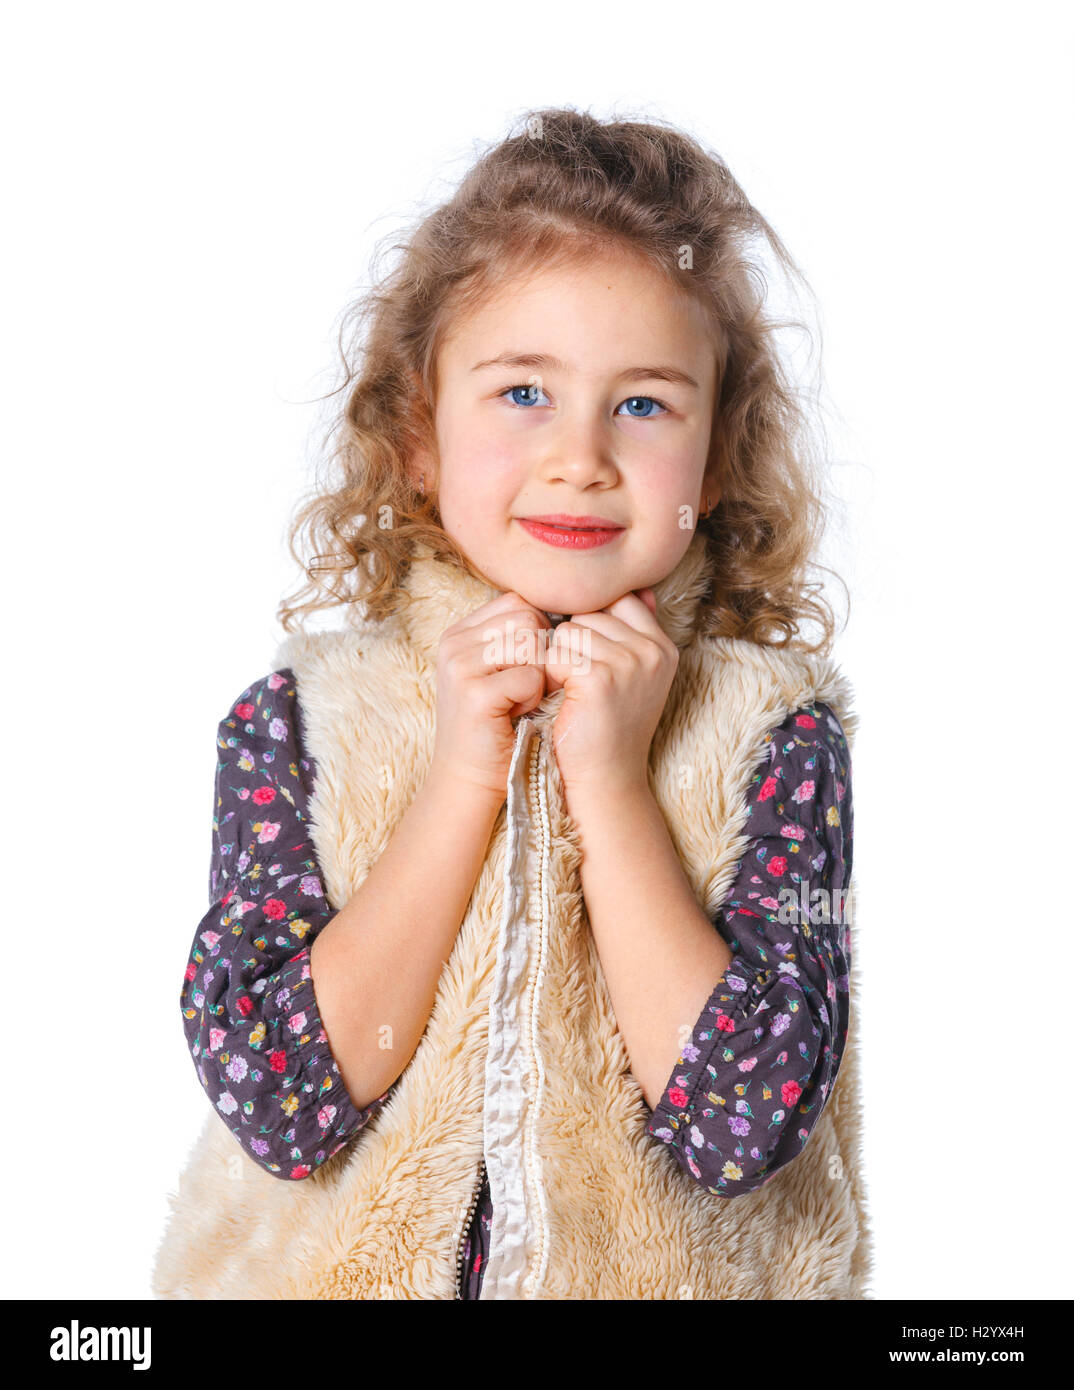 girl in winter clothes Stock Photo